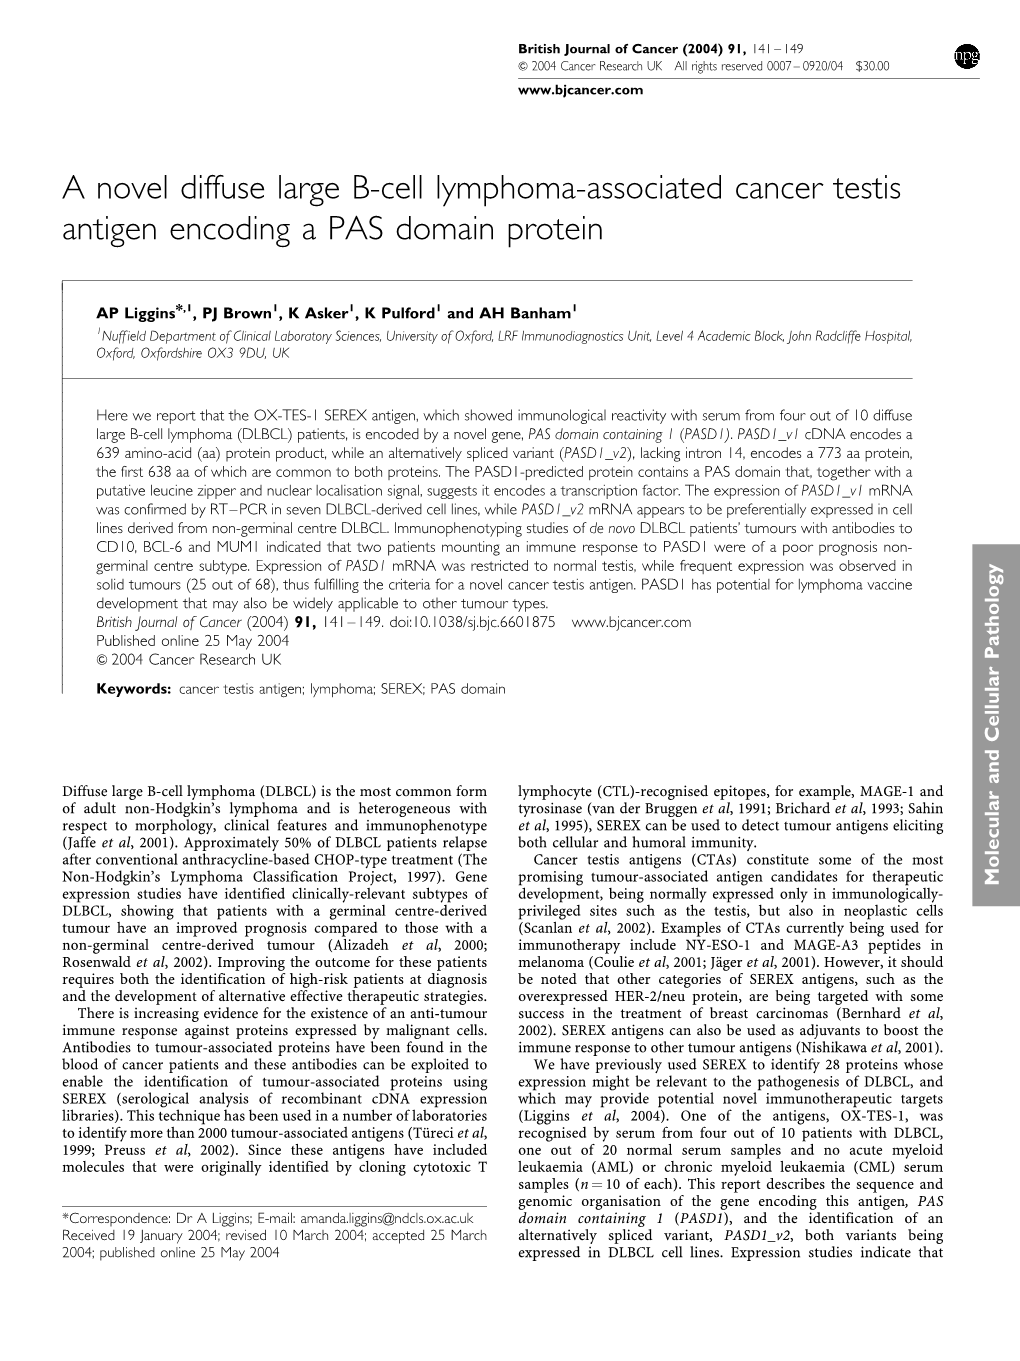 A Novel Diffuse Large B-Cell Lymphoma-Associated Cancer Testis Antigen Encoding a PAS Domain Protein